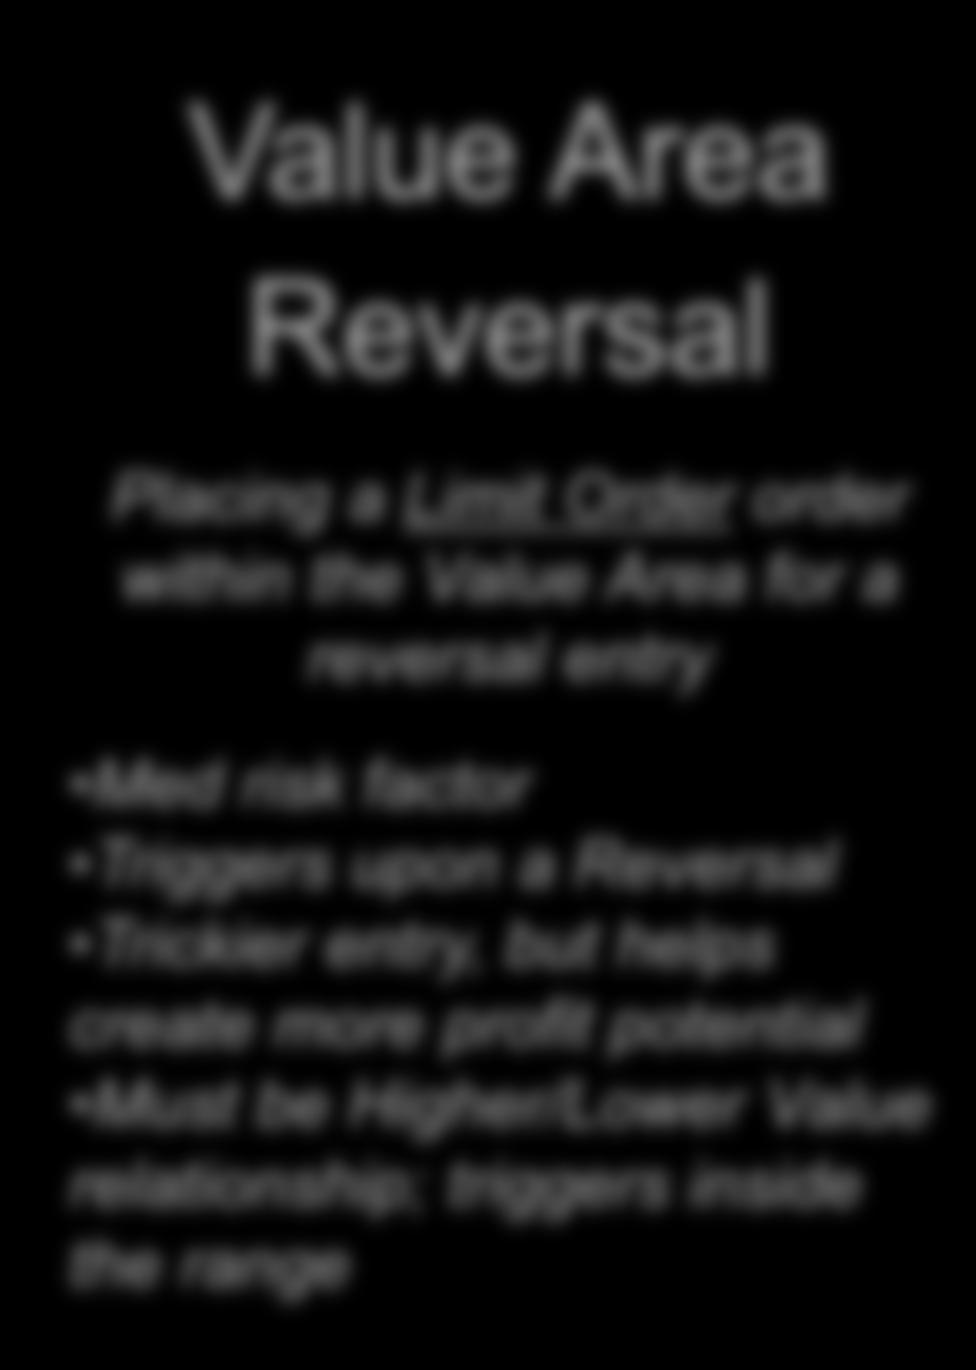 used Value Area Reversal Placing a Limit Order order within the Value Area for a reversal entry Med risk factor Triggers upon a